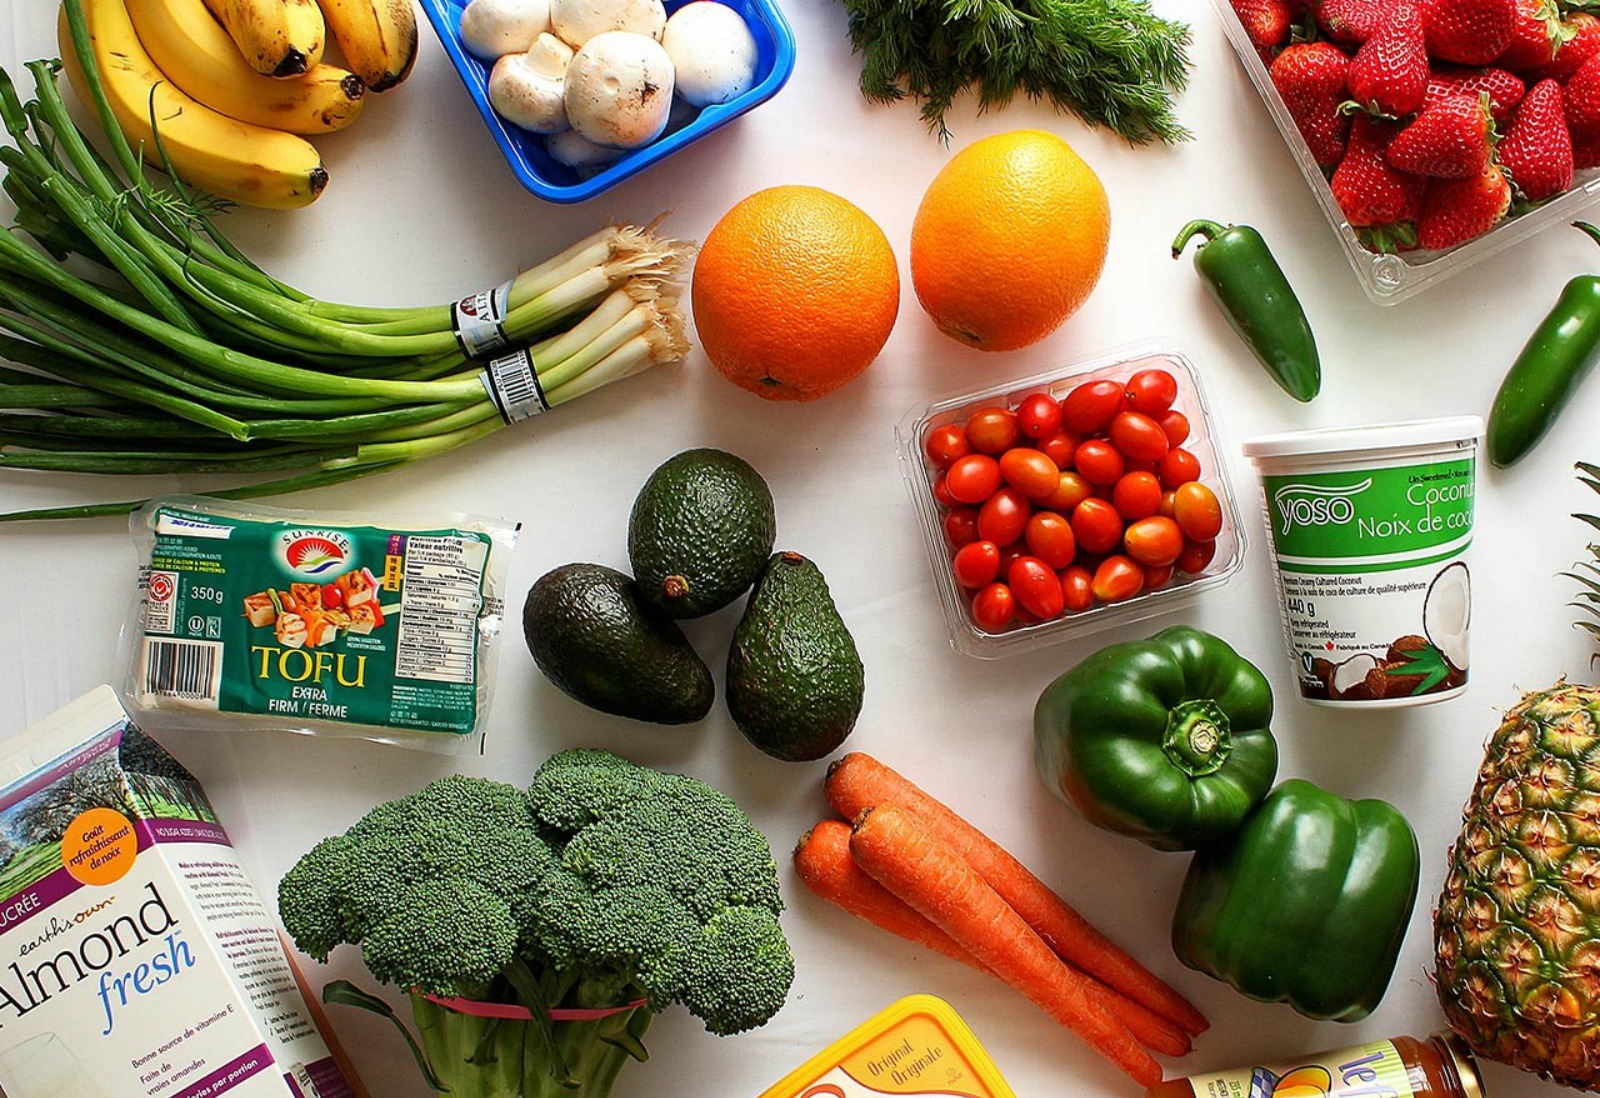 Easy Tips to Shop Meat-Free and Stay Healthy